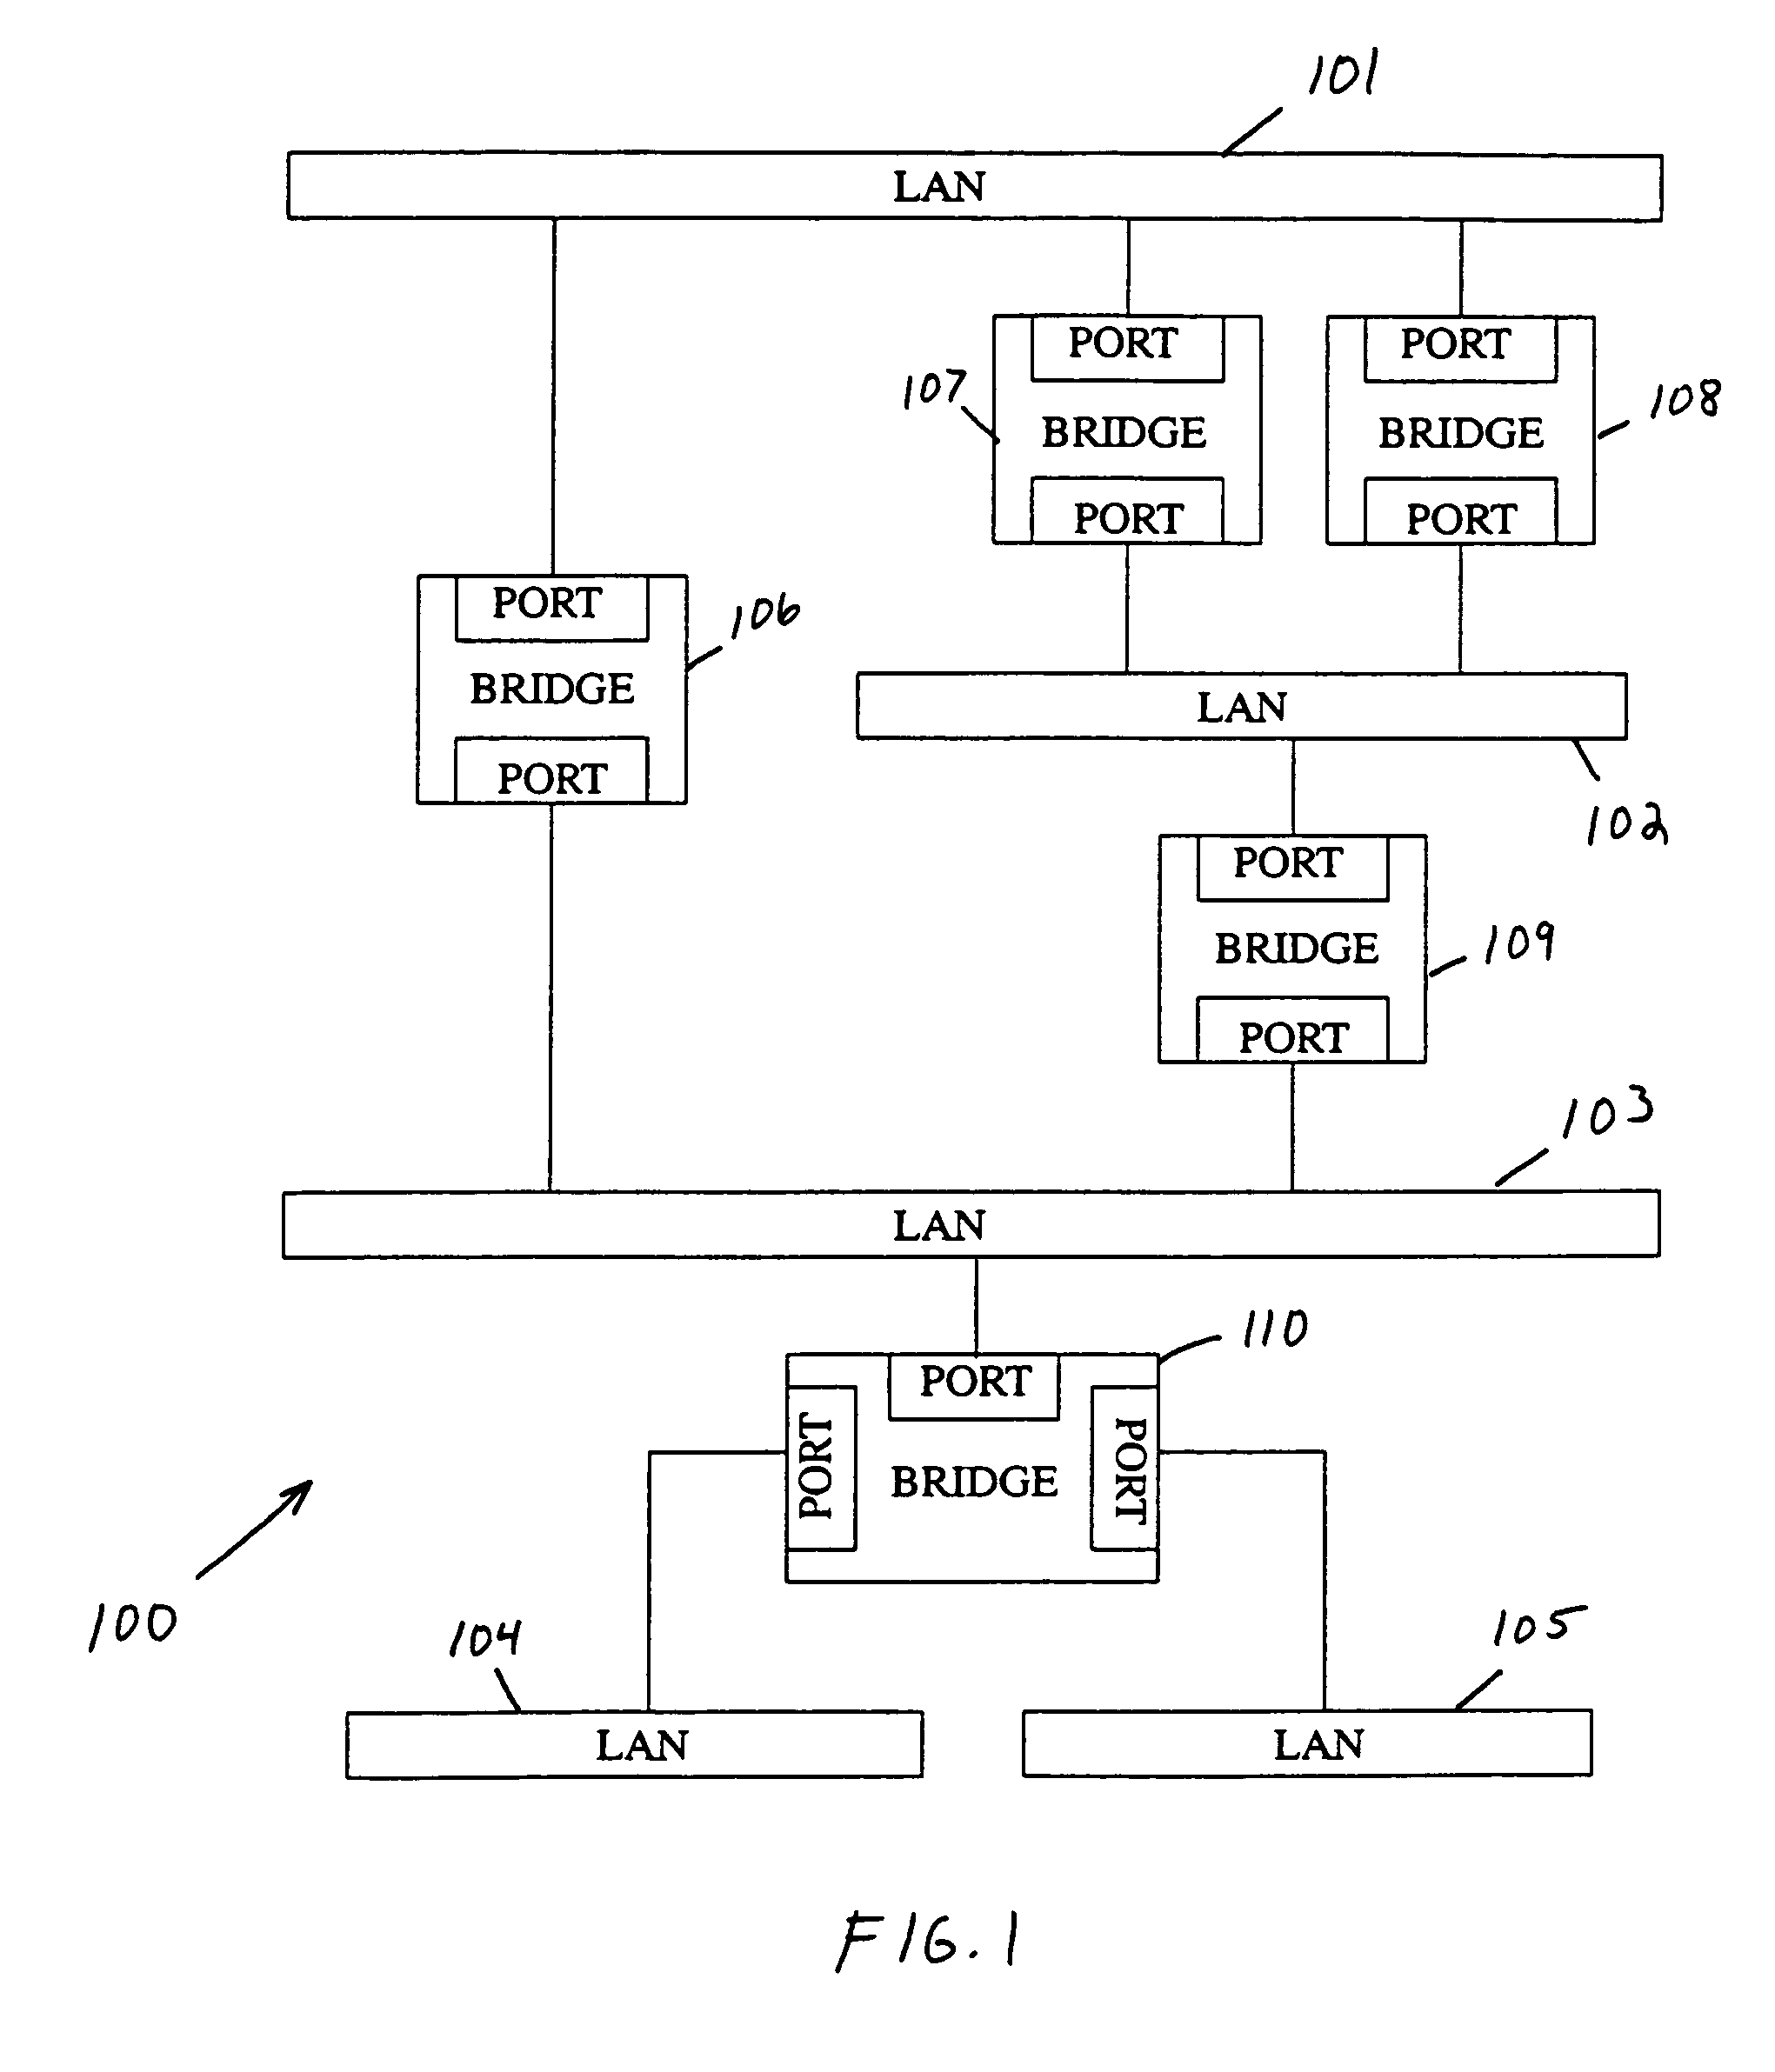 Counting of GVRP protocol data units within a network bridge